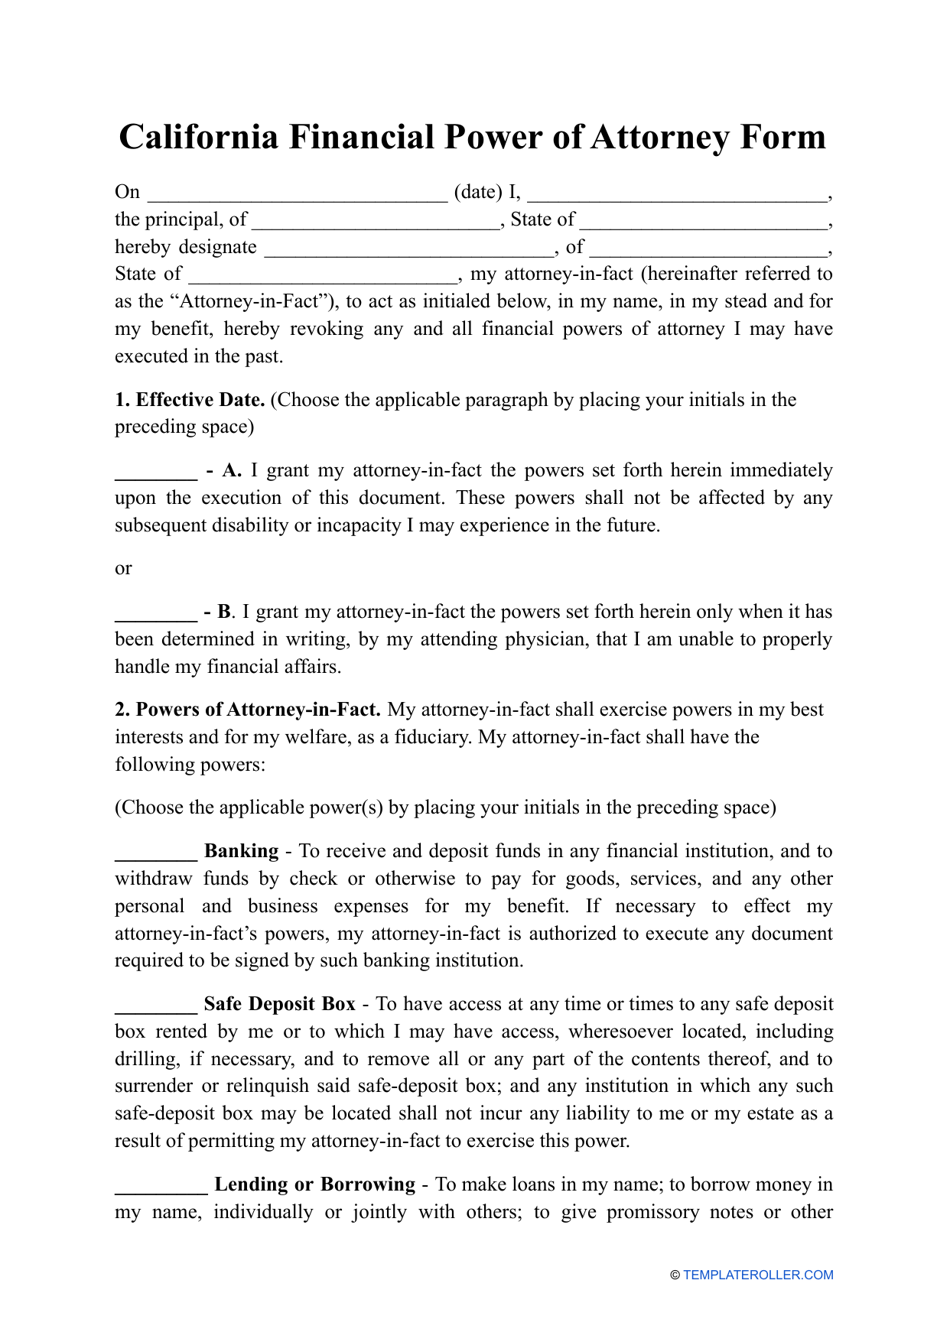 Financial Power of Attorney Form - California, Page 1